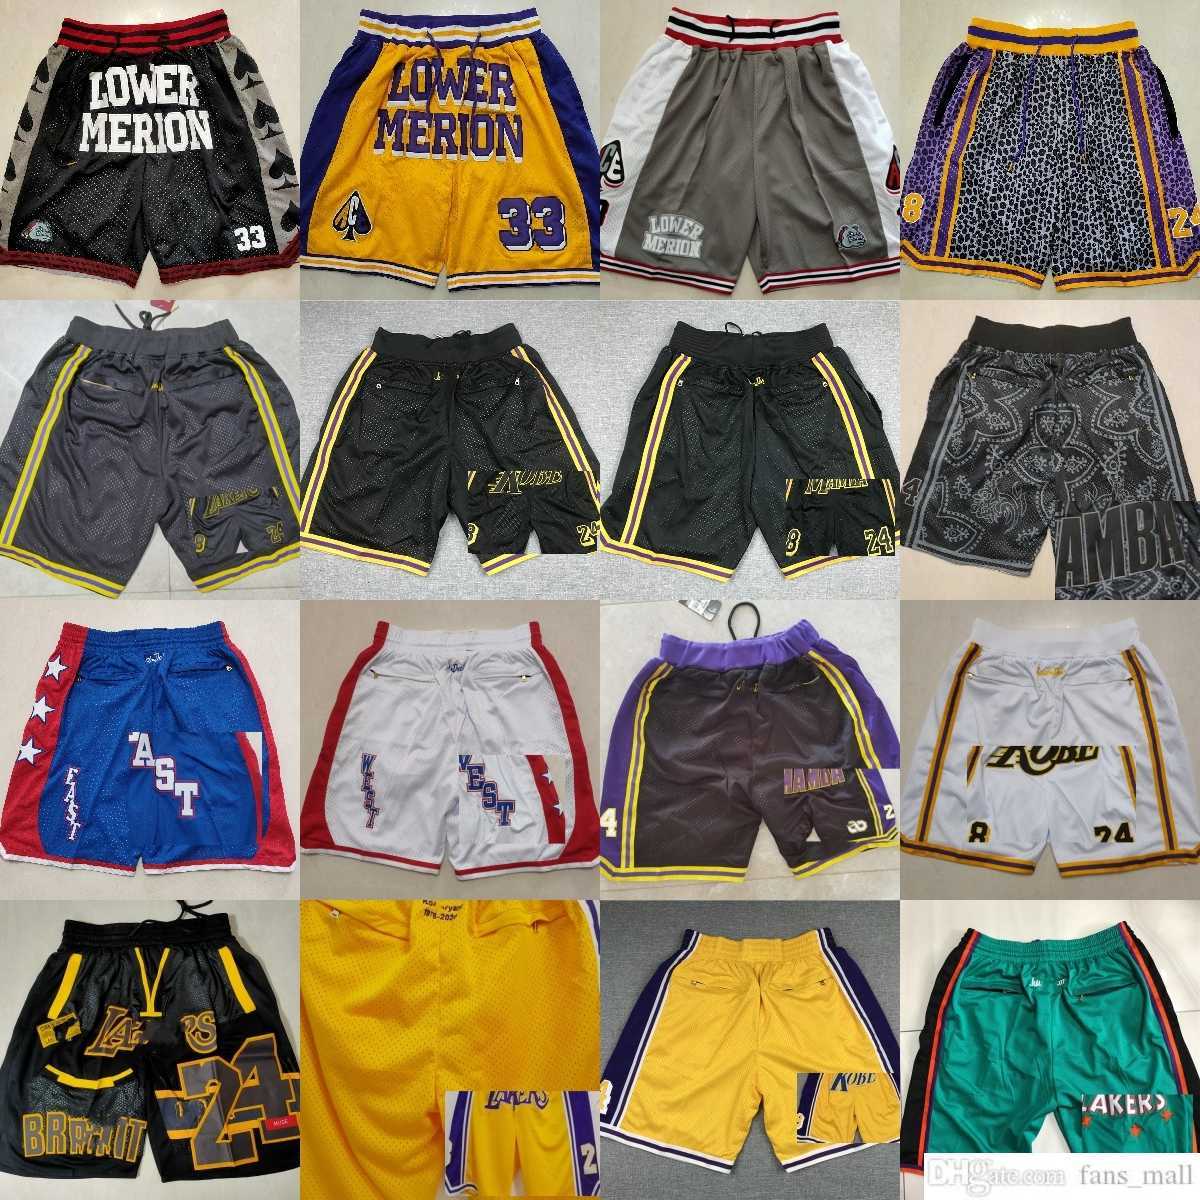 

XS- Just Don Basketball Shorts Classic Los 24Angeles 8 BlackMamba With Pocket Breathable Beach Short Hip Pop Sweatpants East West All-stars Lower Merion College, Justdon (with 4 pocket)